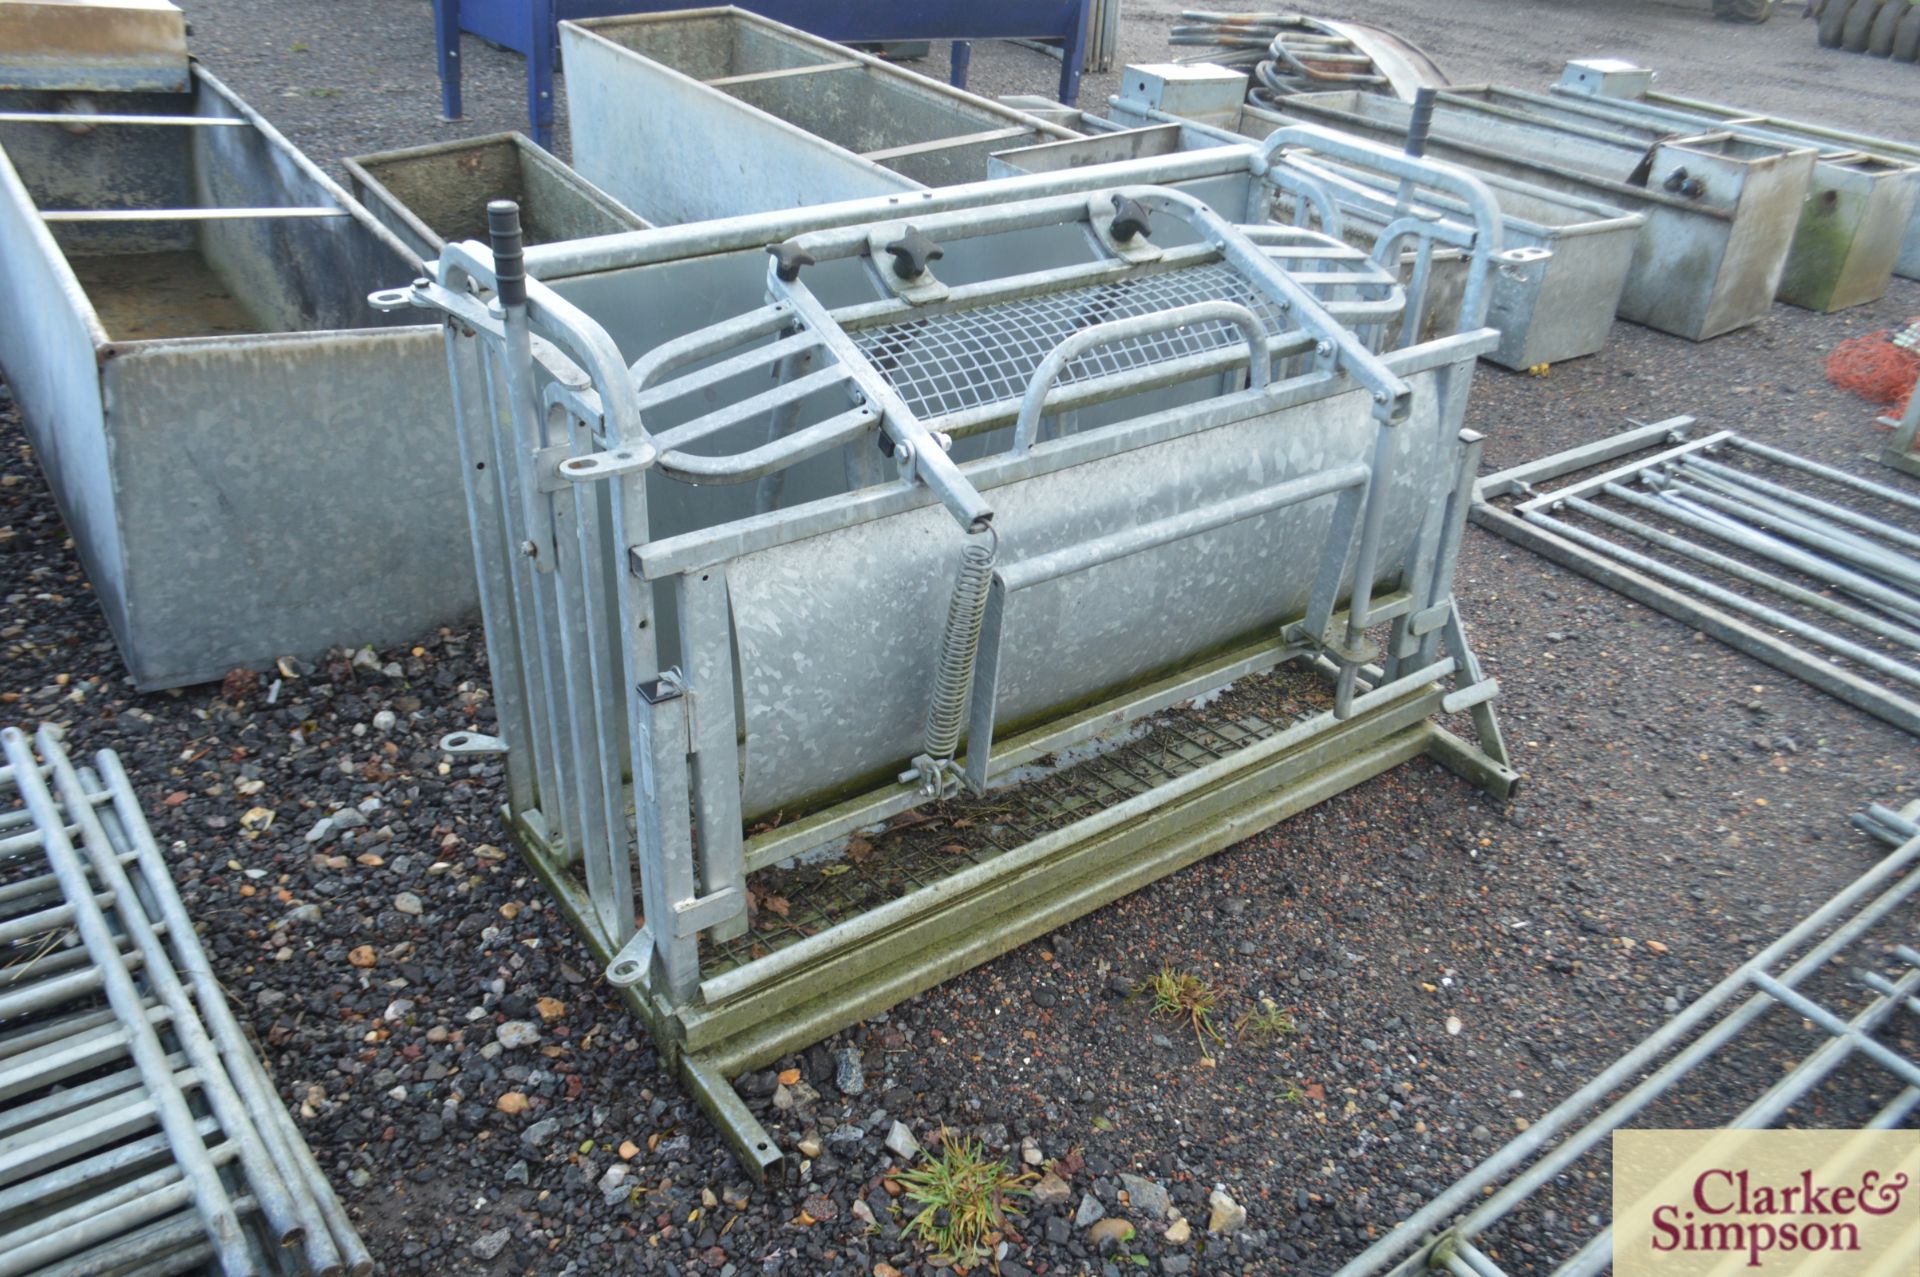 IAE sheep roll over crate. - Image 2 of 4